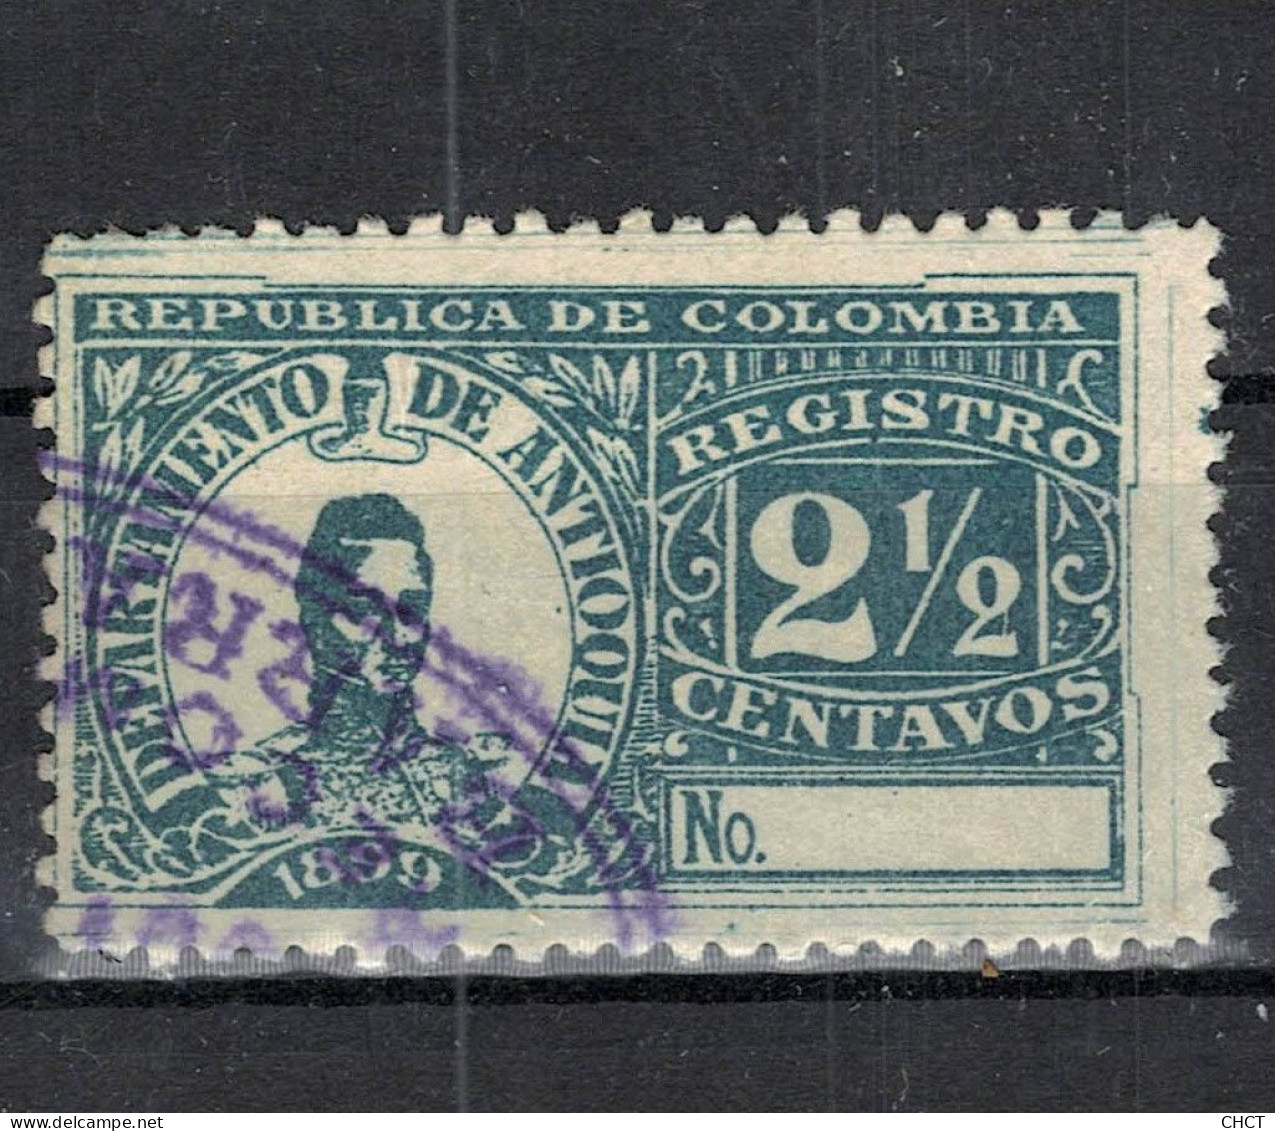 CHCT85 - Registro 2 1/2 Centavos, Used, 1899, Department Of Antioquia, Colombia - Colombia